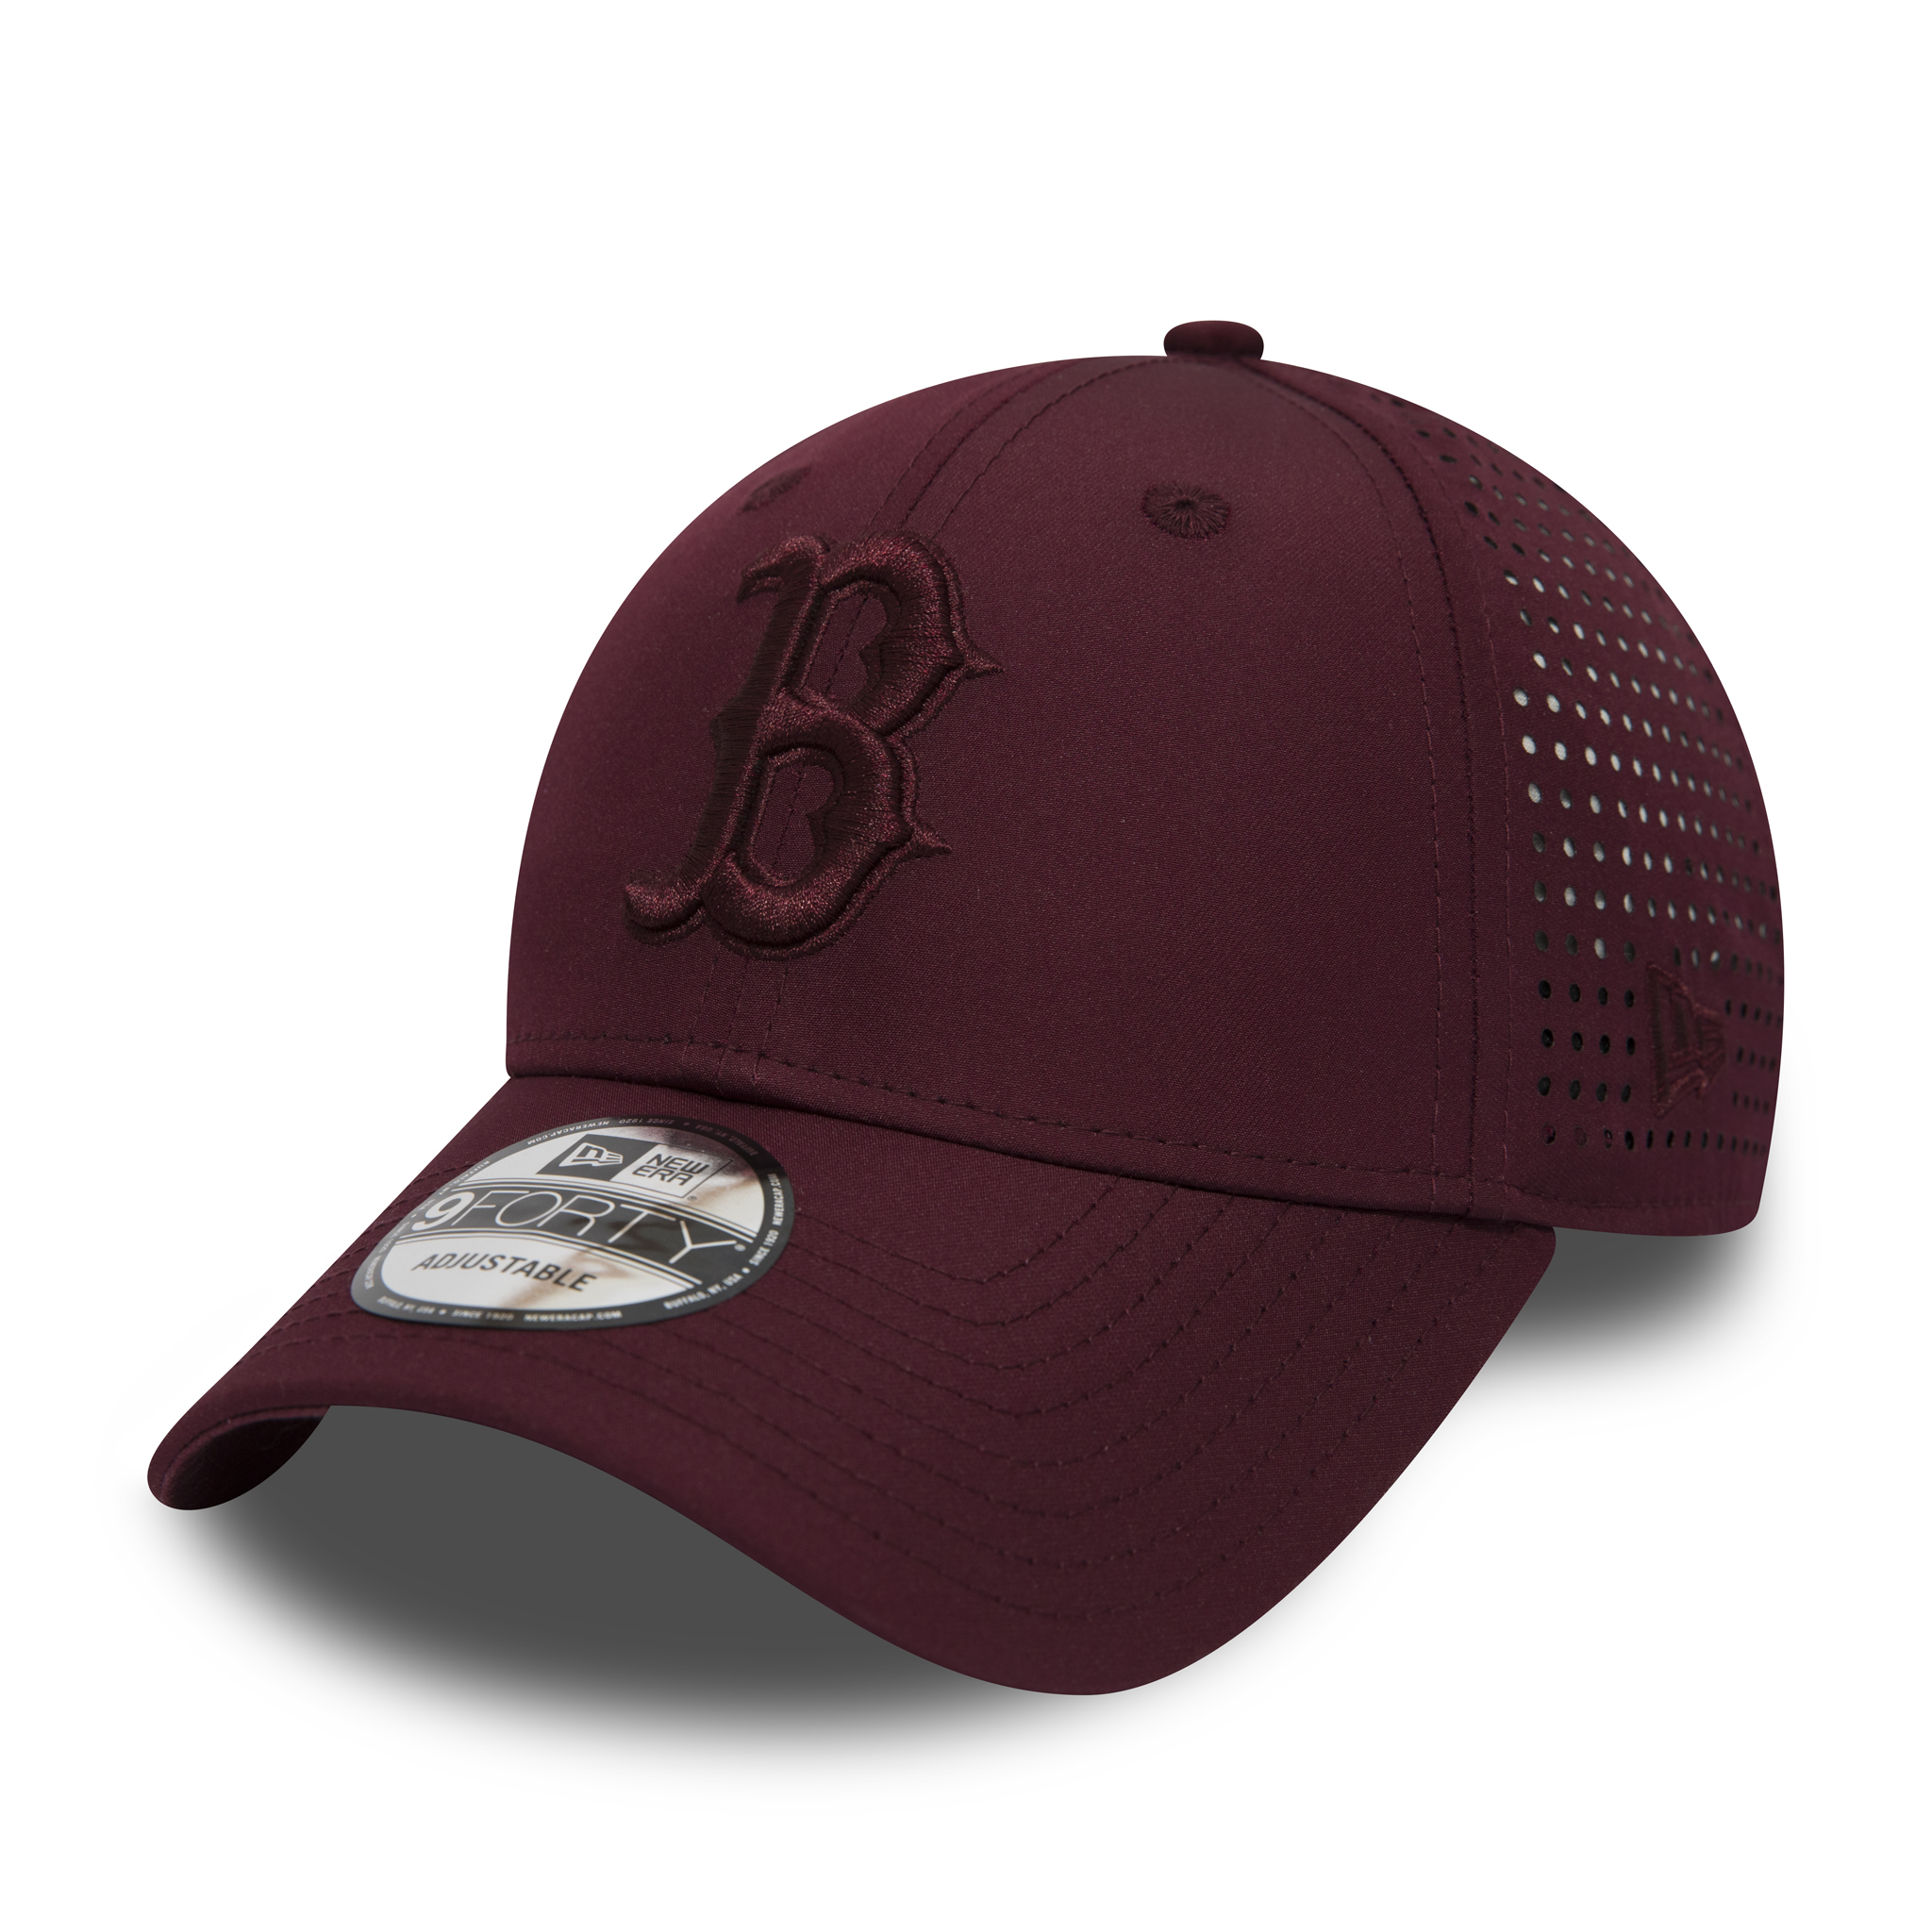 Boston Red Sox Burgundy 9FORTY Cap